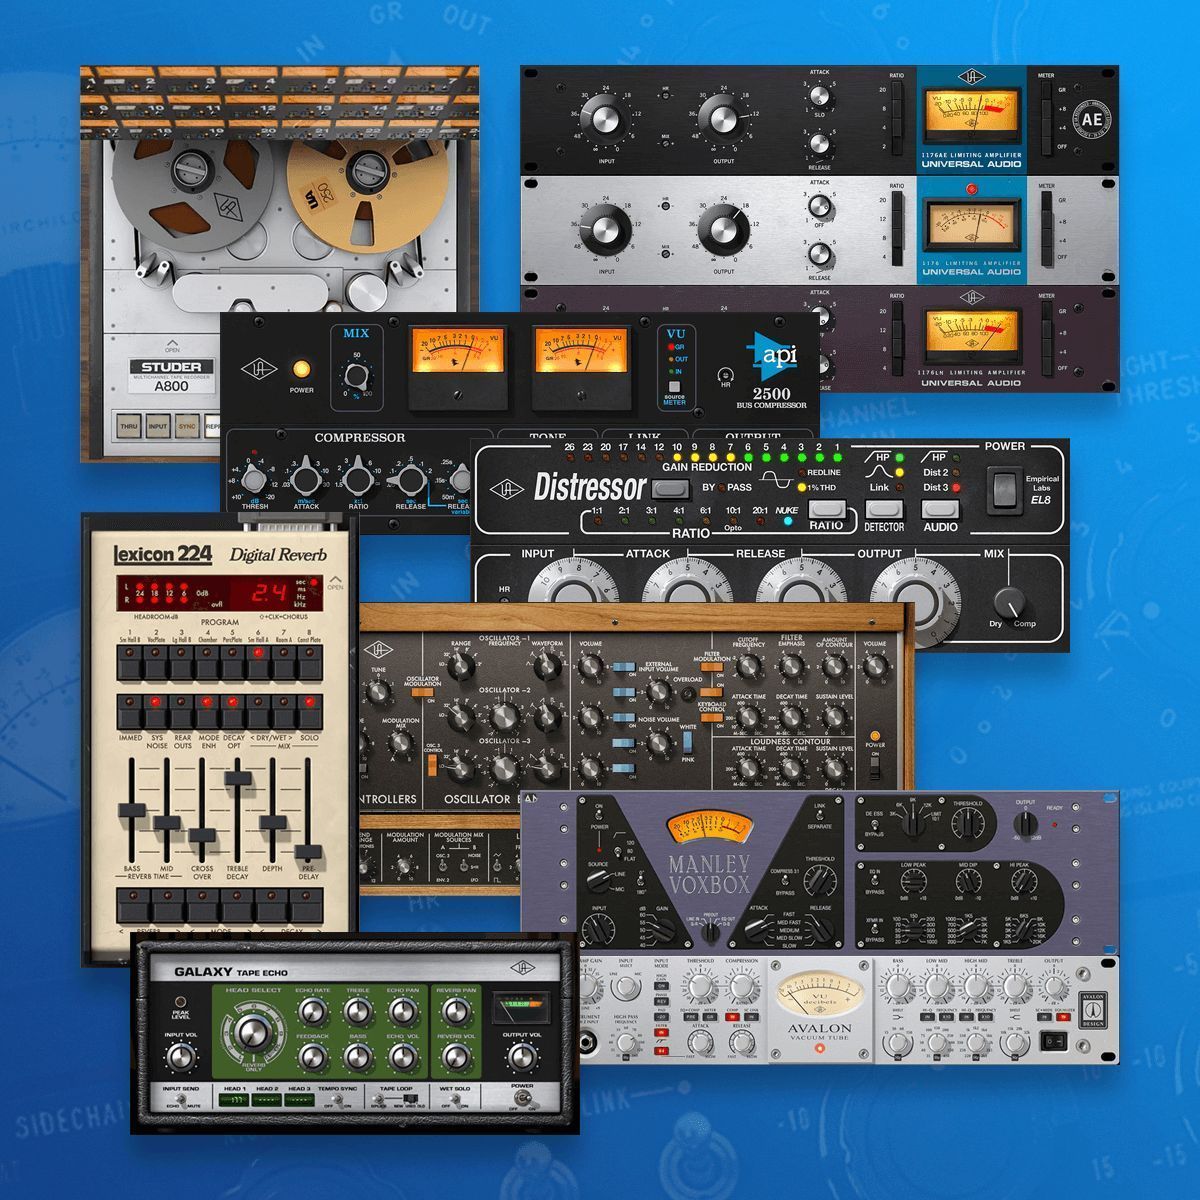 Universal Audio Flashback 50 Sale
Save up to 87% - Prices from $29

Buy here: pluginfox.com/ua

Sale ends May 28th ⏰

@uaudio #universalaudio #plugindeals #pluginsales #pluginfox #dtm #plugins #vstplugins